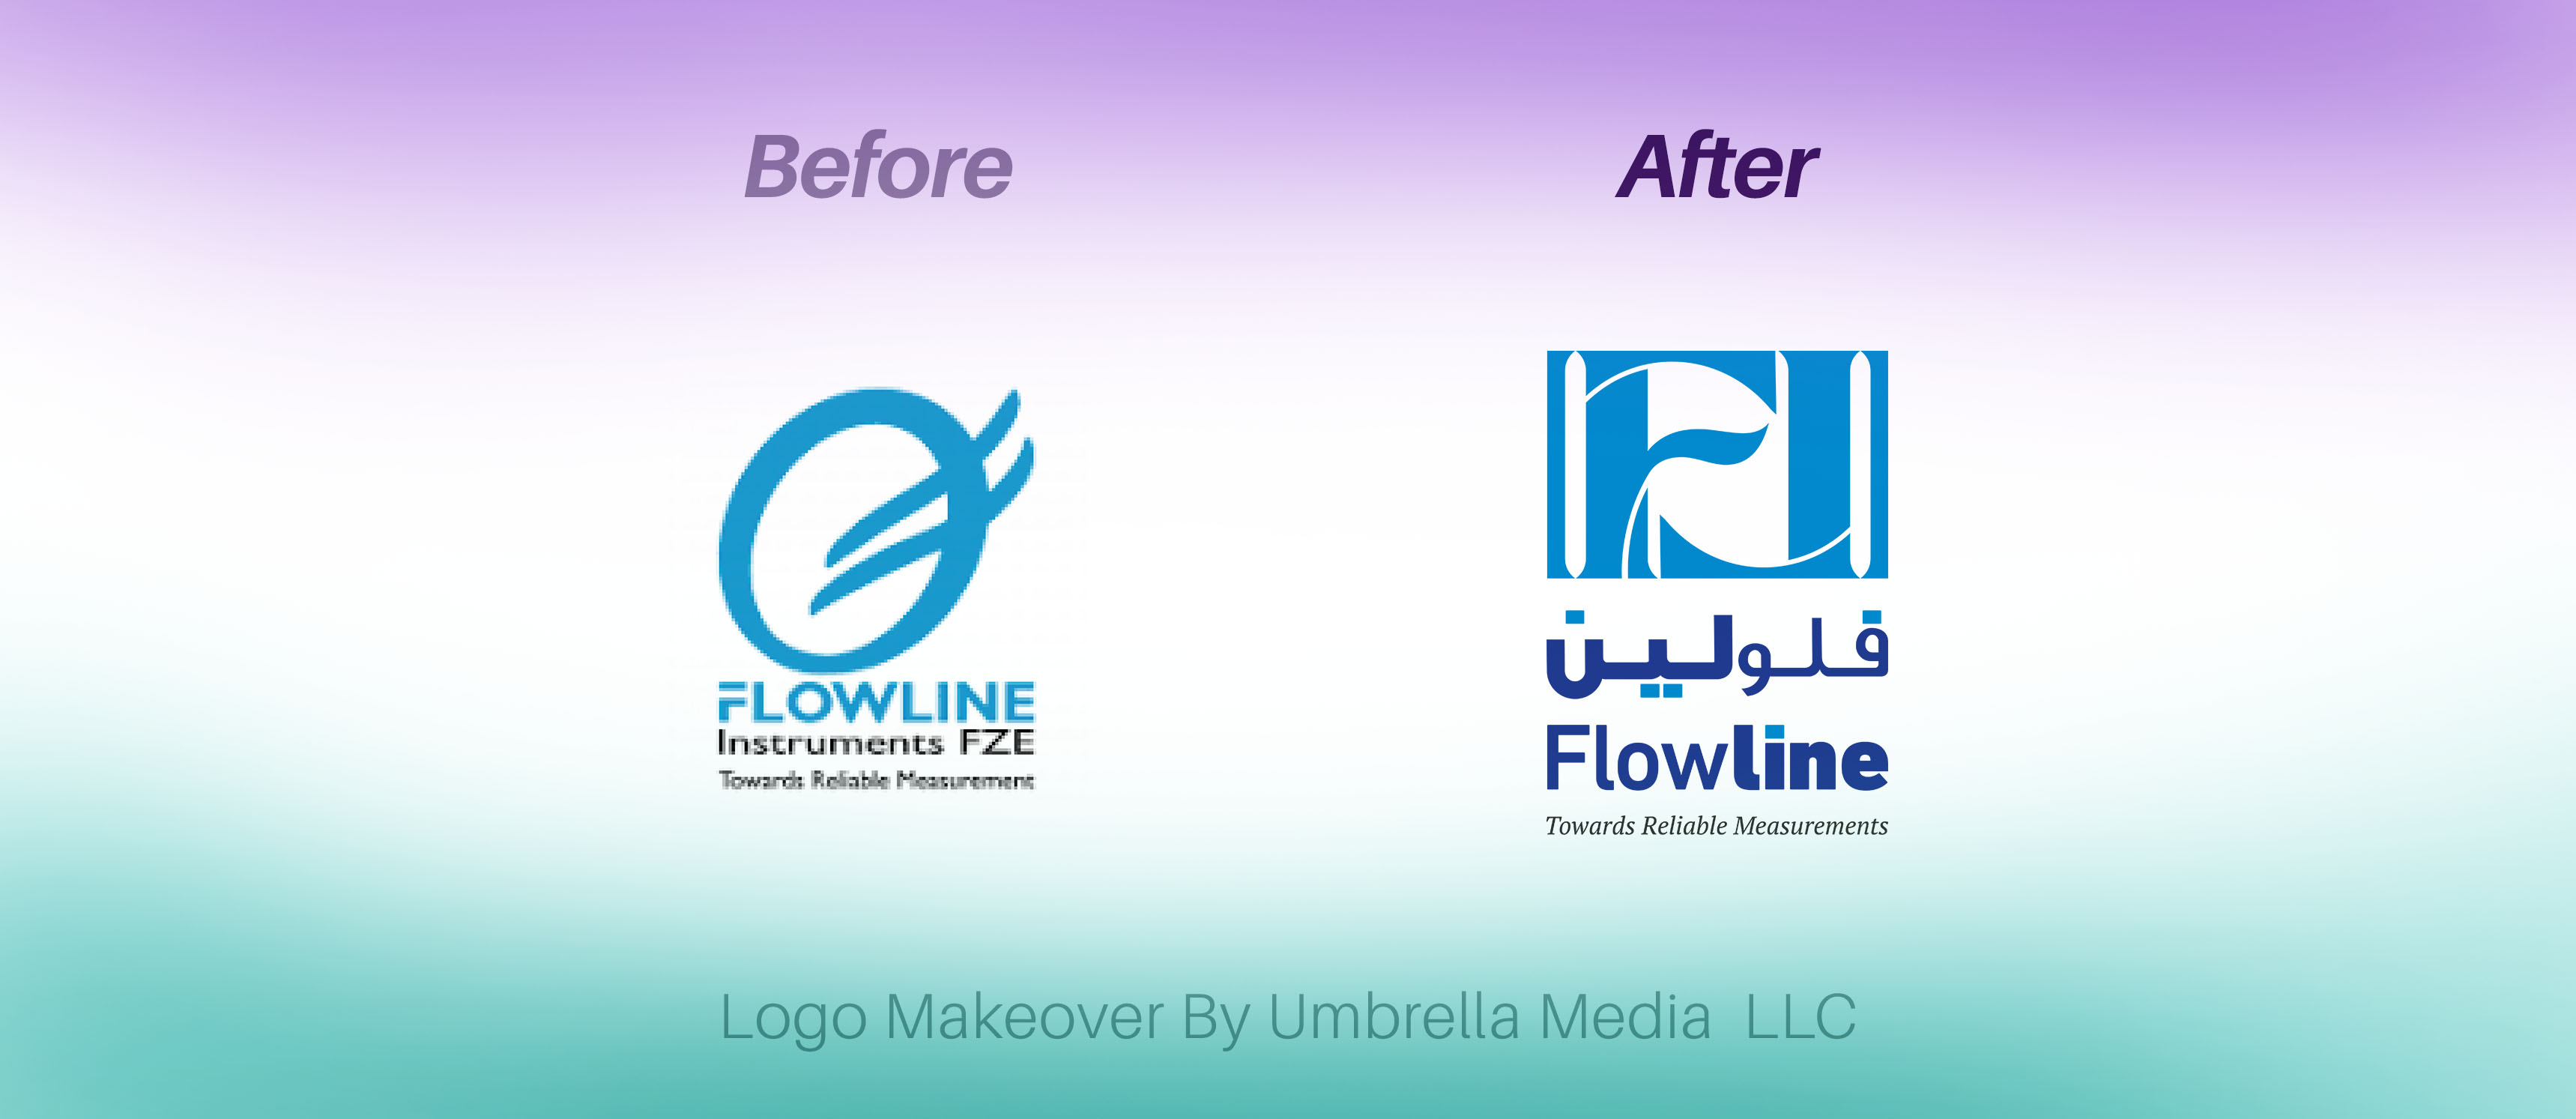 Picture showing logo makeover